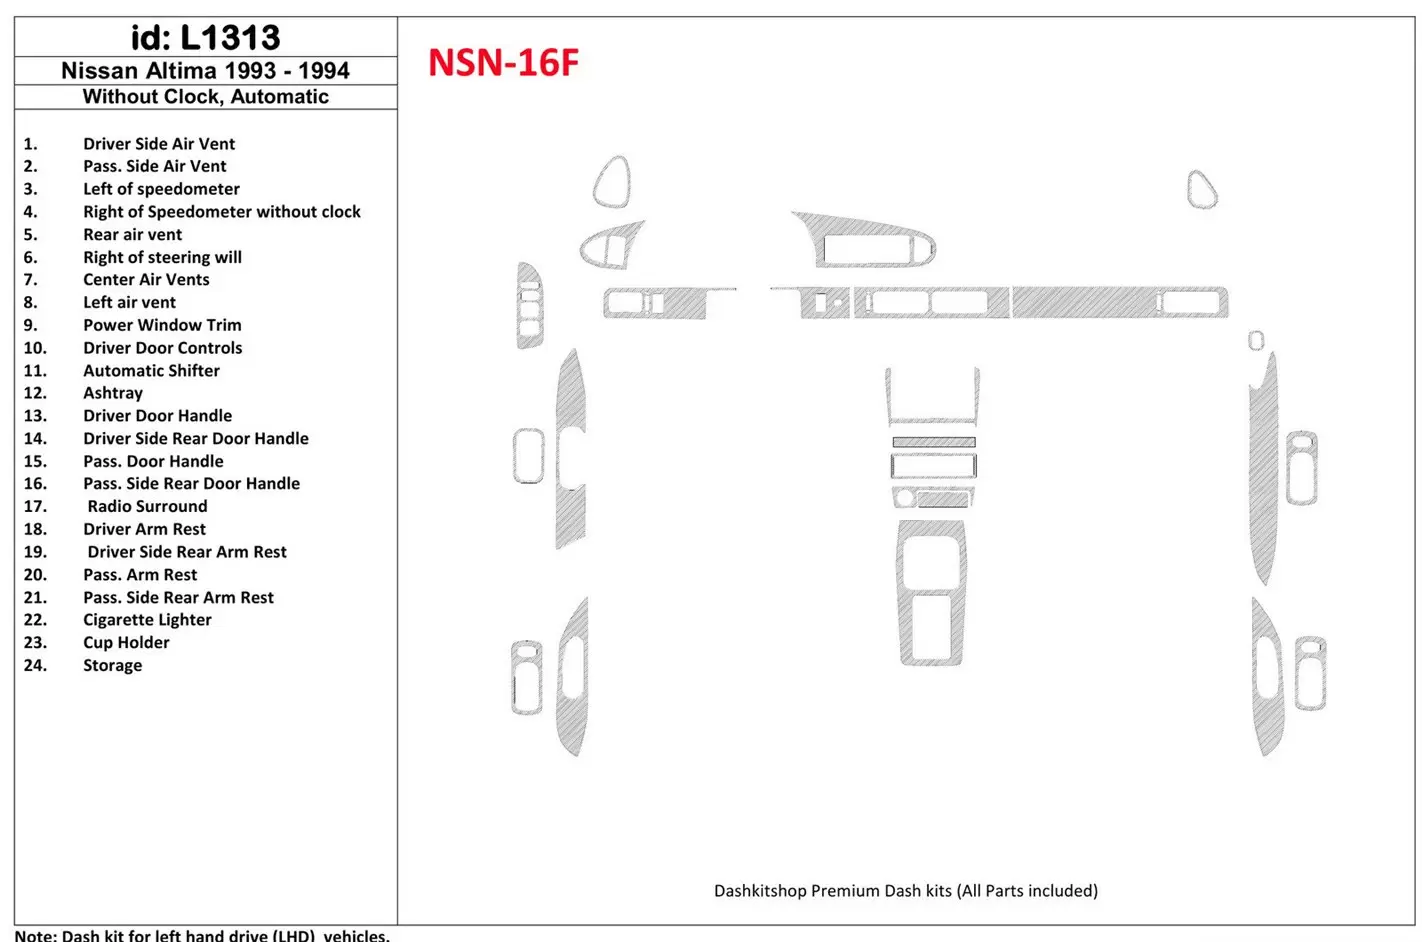 Nissan Altima 1993-1993 Automatic Gearbox, Without watches, Without OEM, 23 Parts set BD innenausstattung armaturendekor cockpit